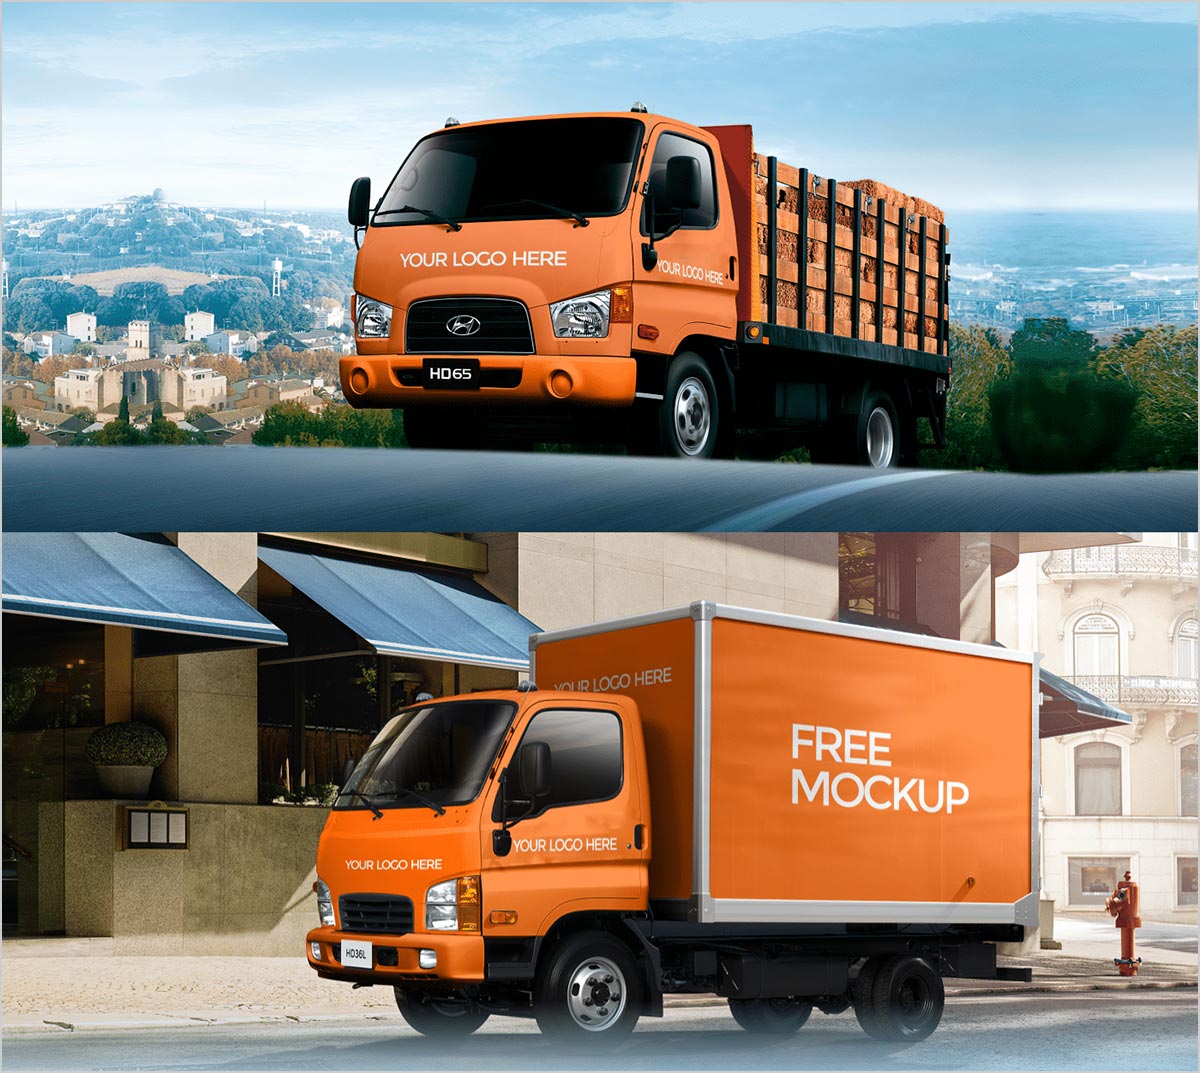 19 Truck Mockup Psd Free Download Packaging